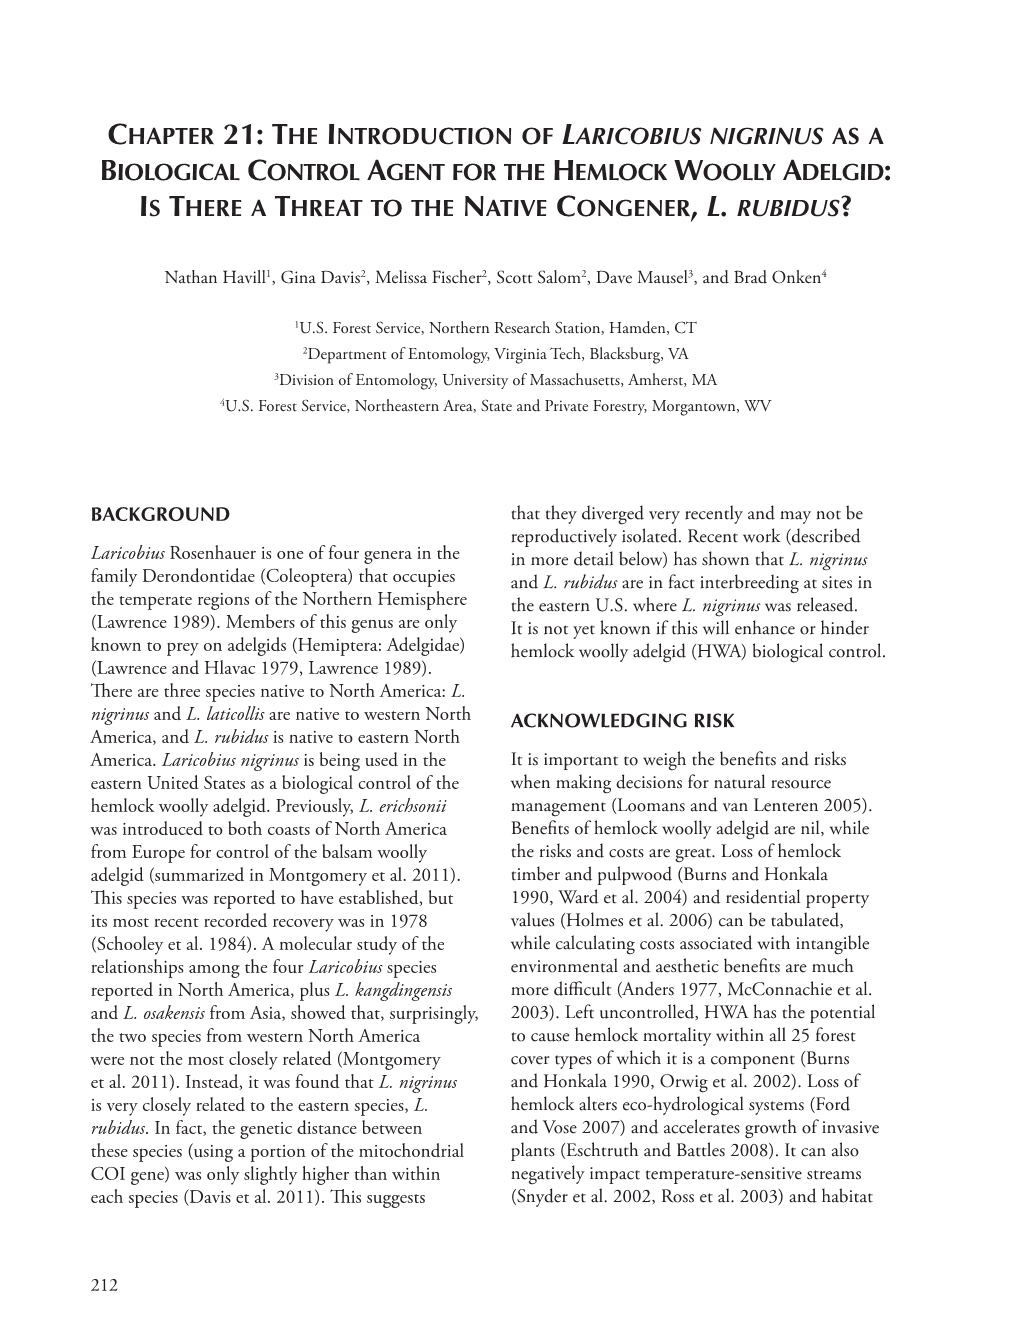 The Introduction of Laricobius Nigrinus As a Biological Control Agent for the Hemlock Woolly Adelgid: Is There a Threat to the Native Congener, L